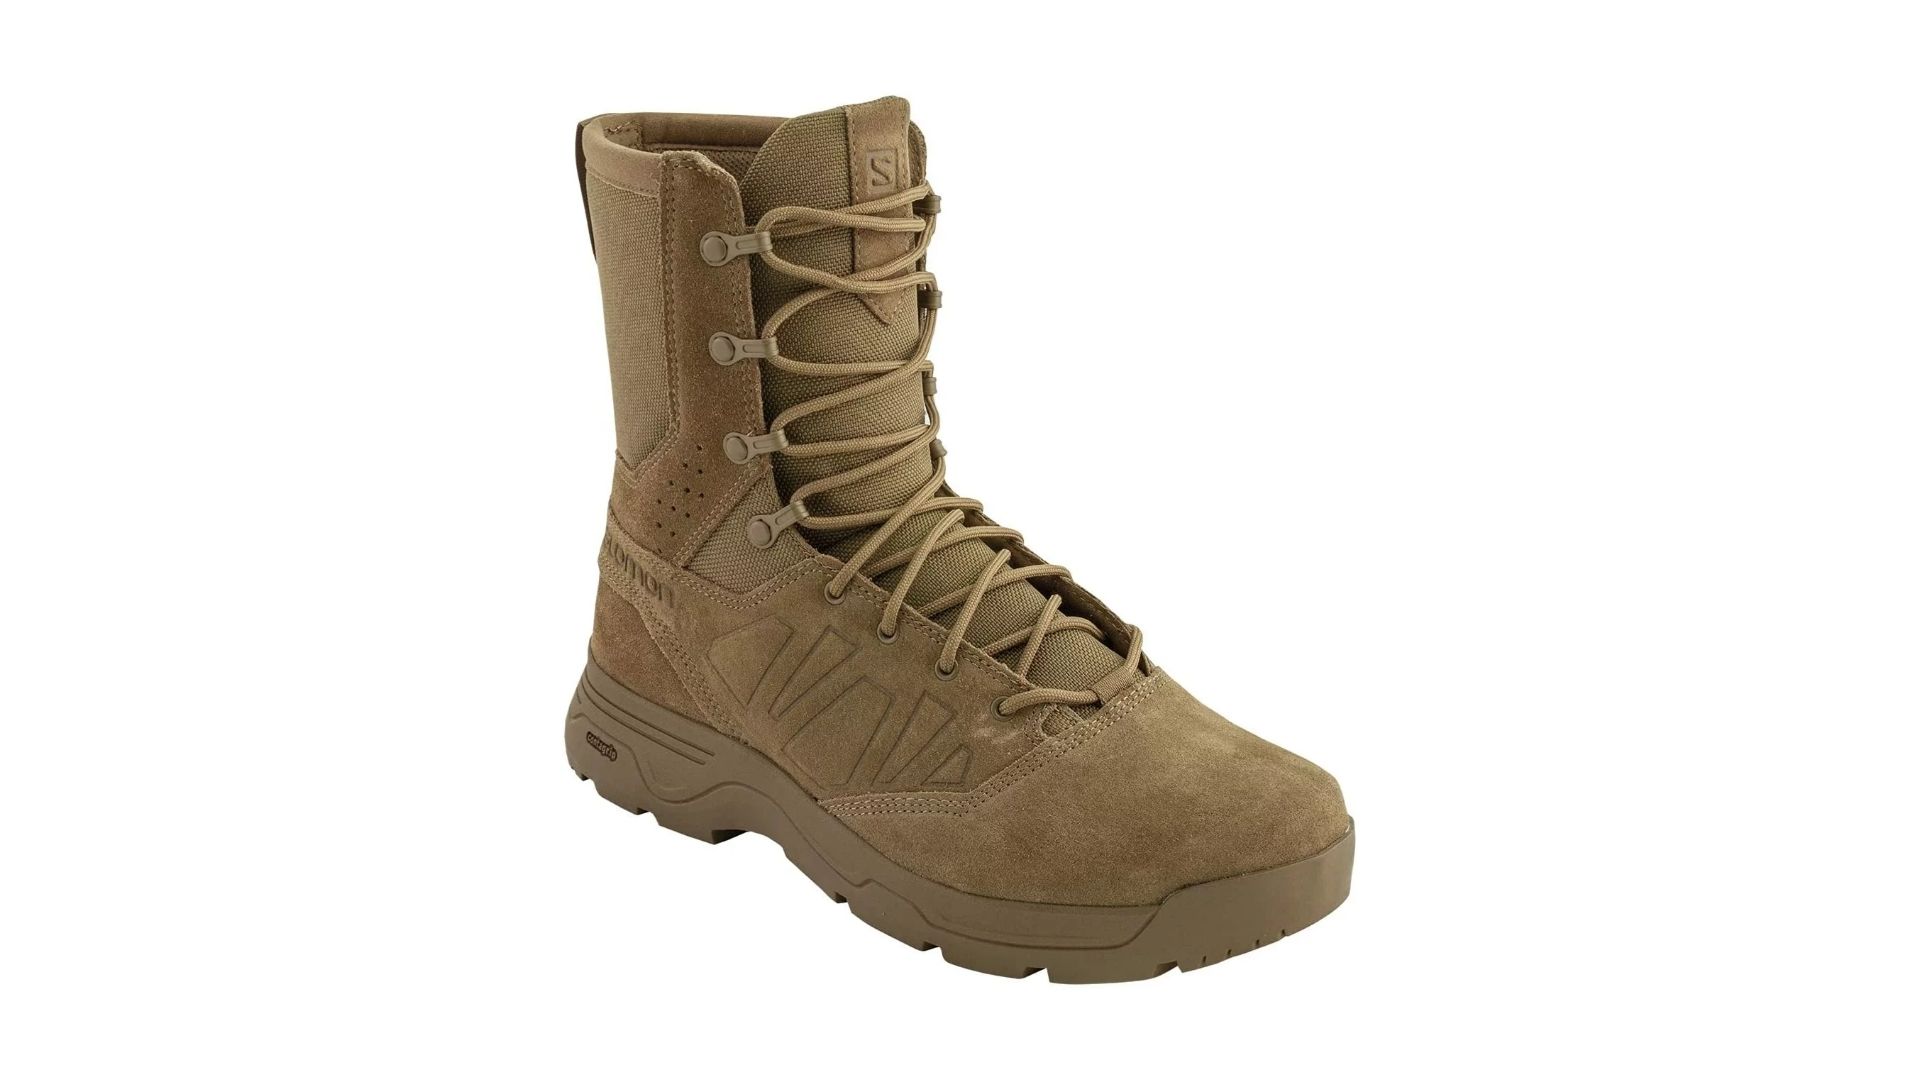 Salomon Forces Guardian AR 670-1 Boot, Coyote Brown / 9